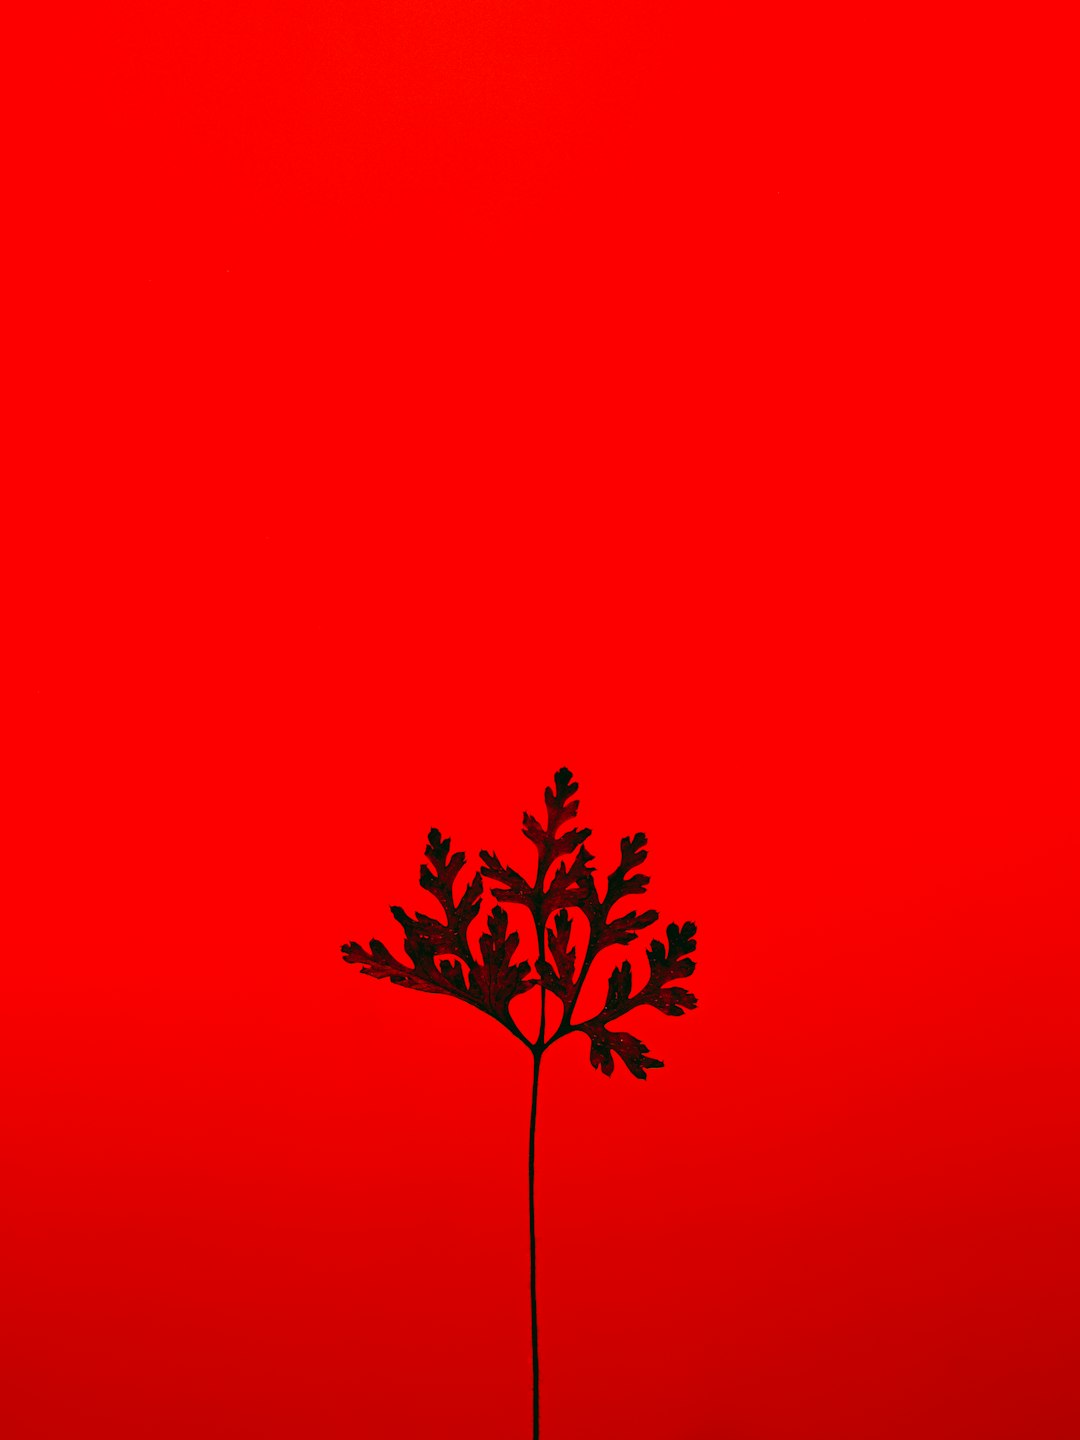 red and black tree with red background